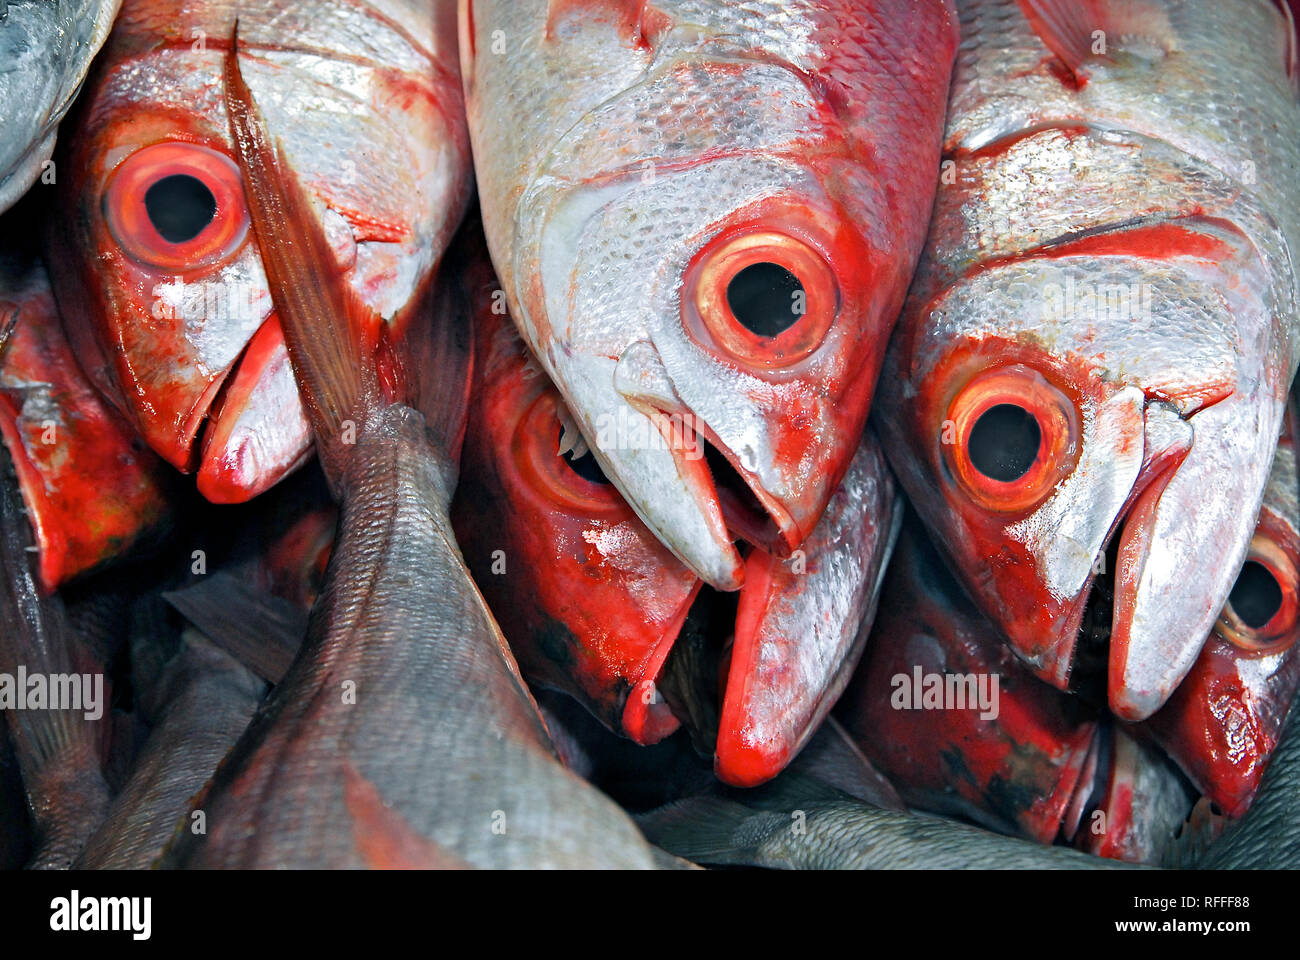 Red eyed Fishes at the Central Wet Market in Puerto Princesa City, Palawan Province, Philippines Stock Photo